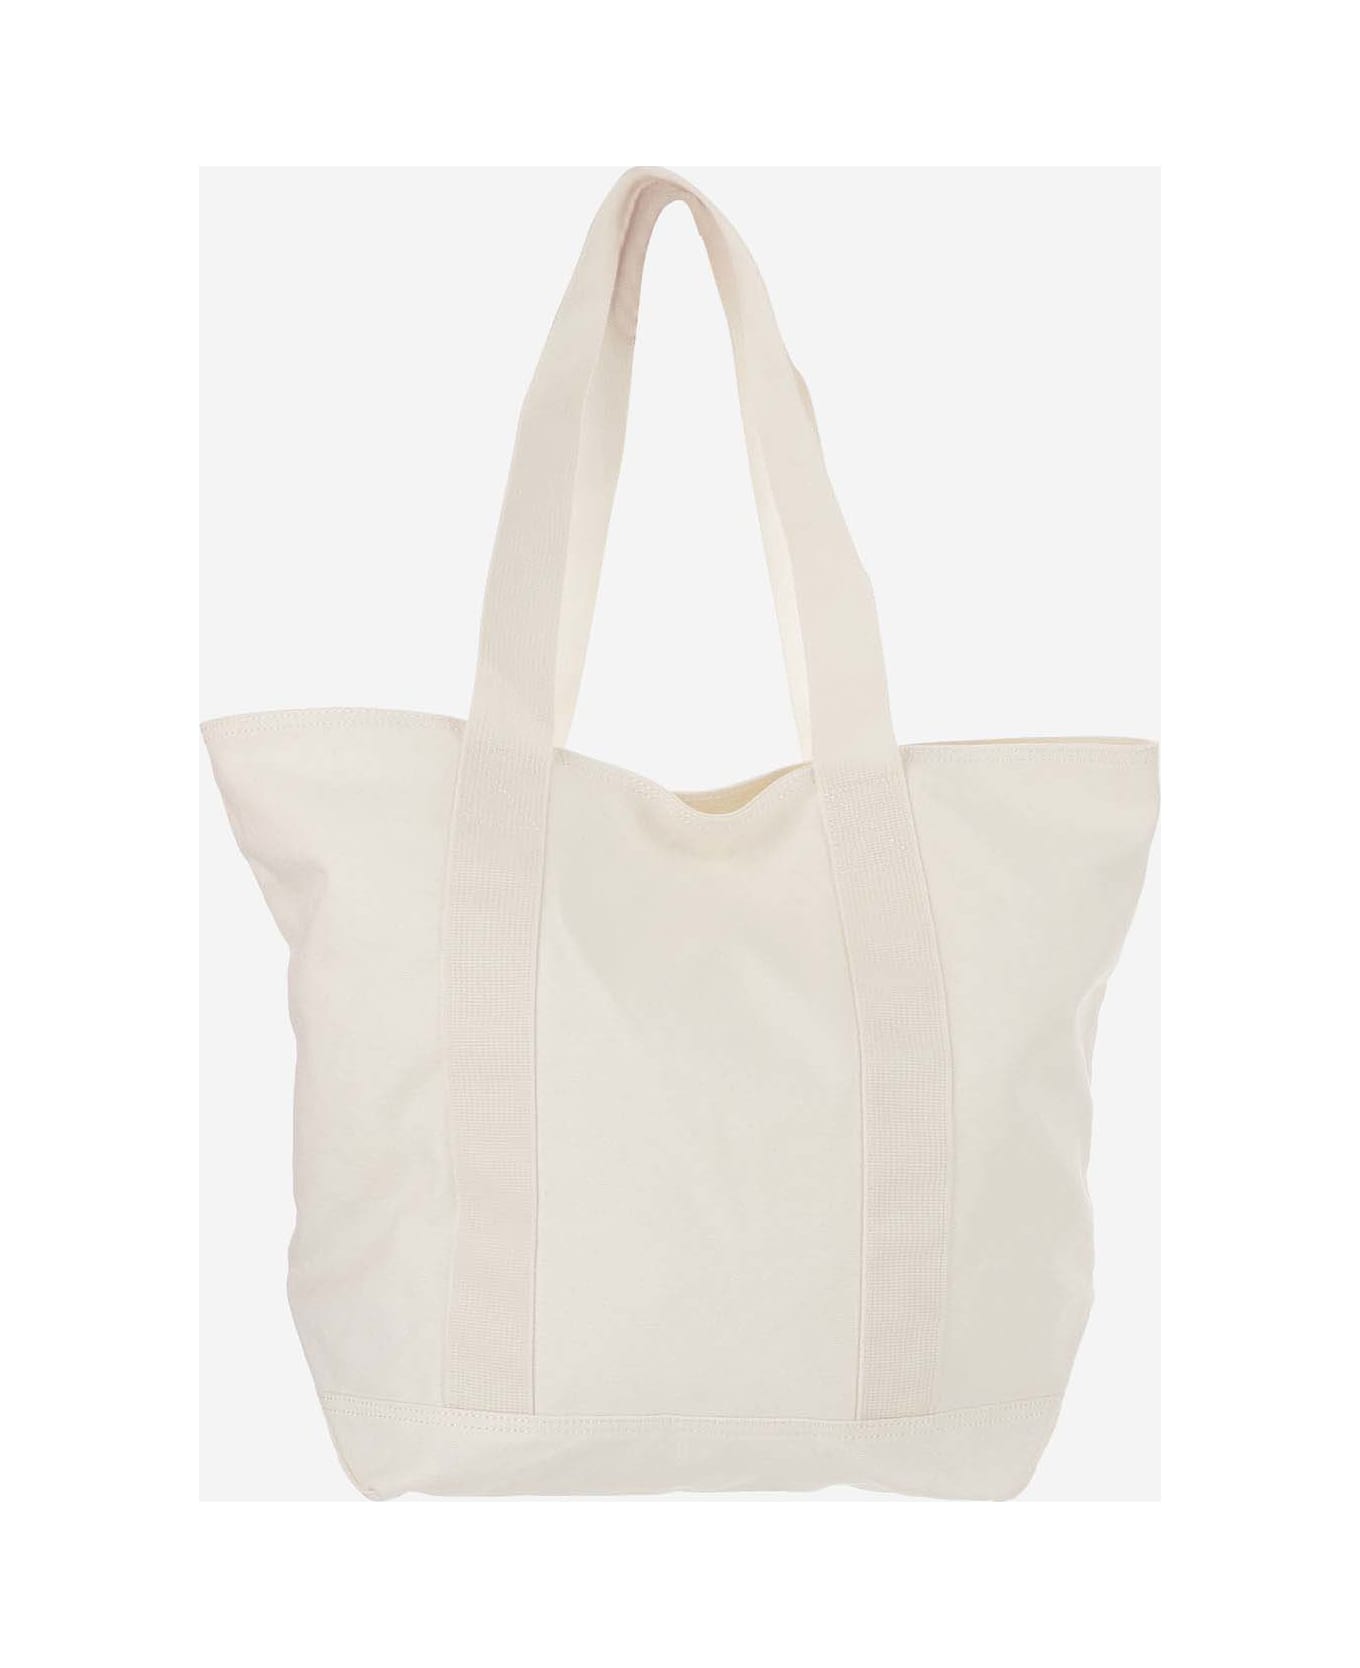 Carhartt Canvas Tote Bag With Logo - Natural トートバッグ